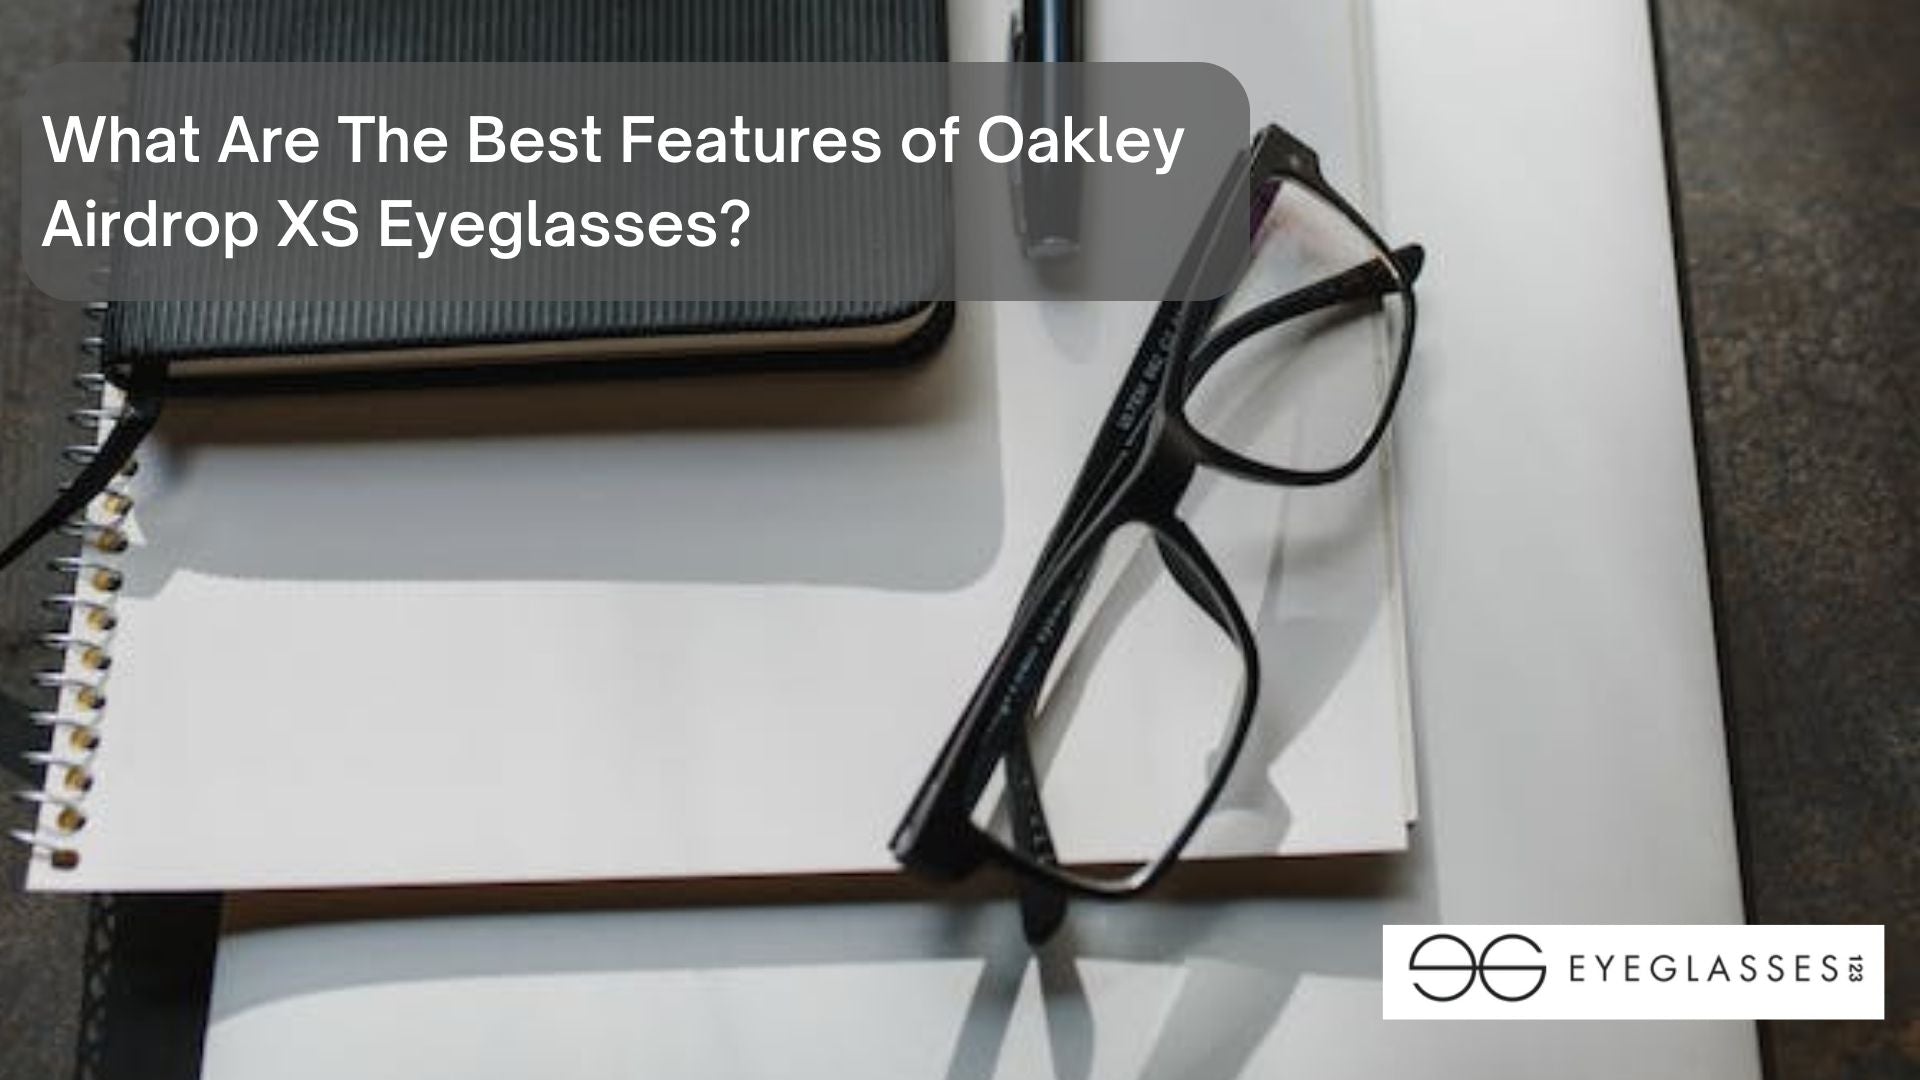 What Are The Best Features of Oakley Airdrop XS Eyeglasses?